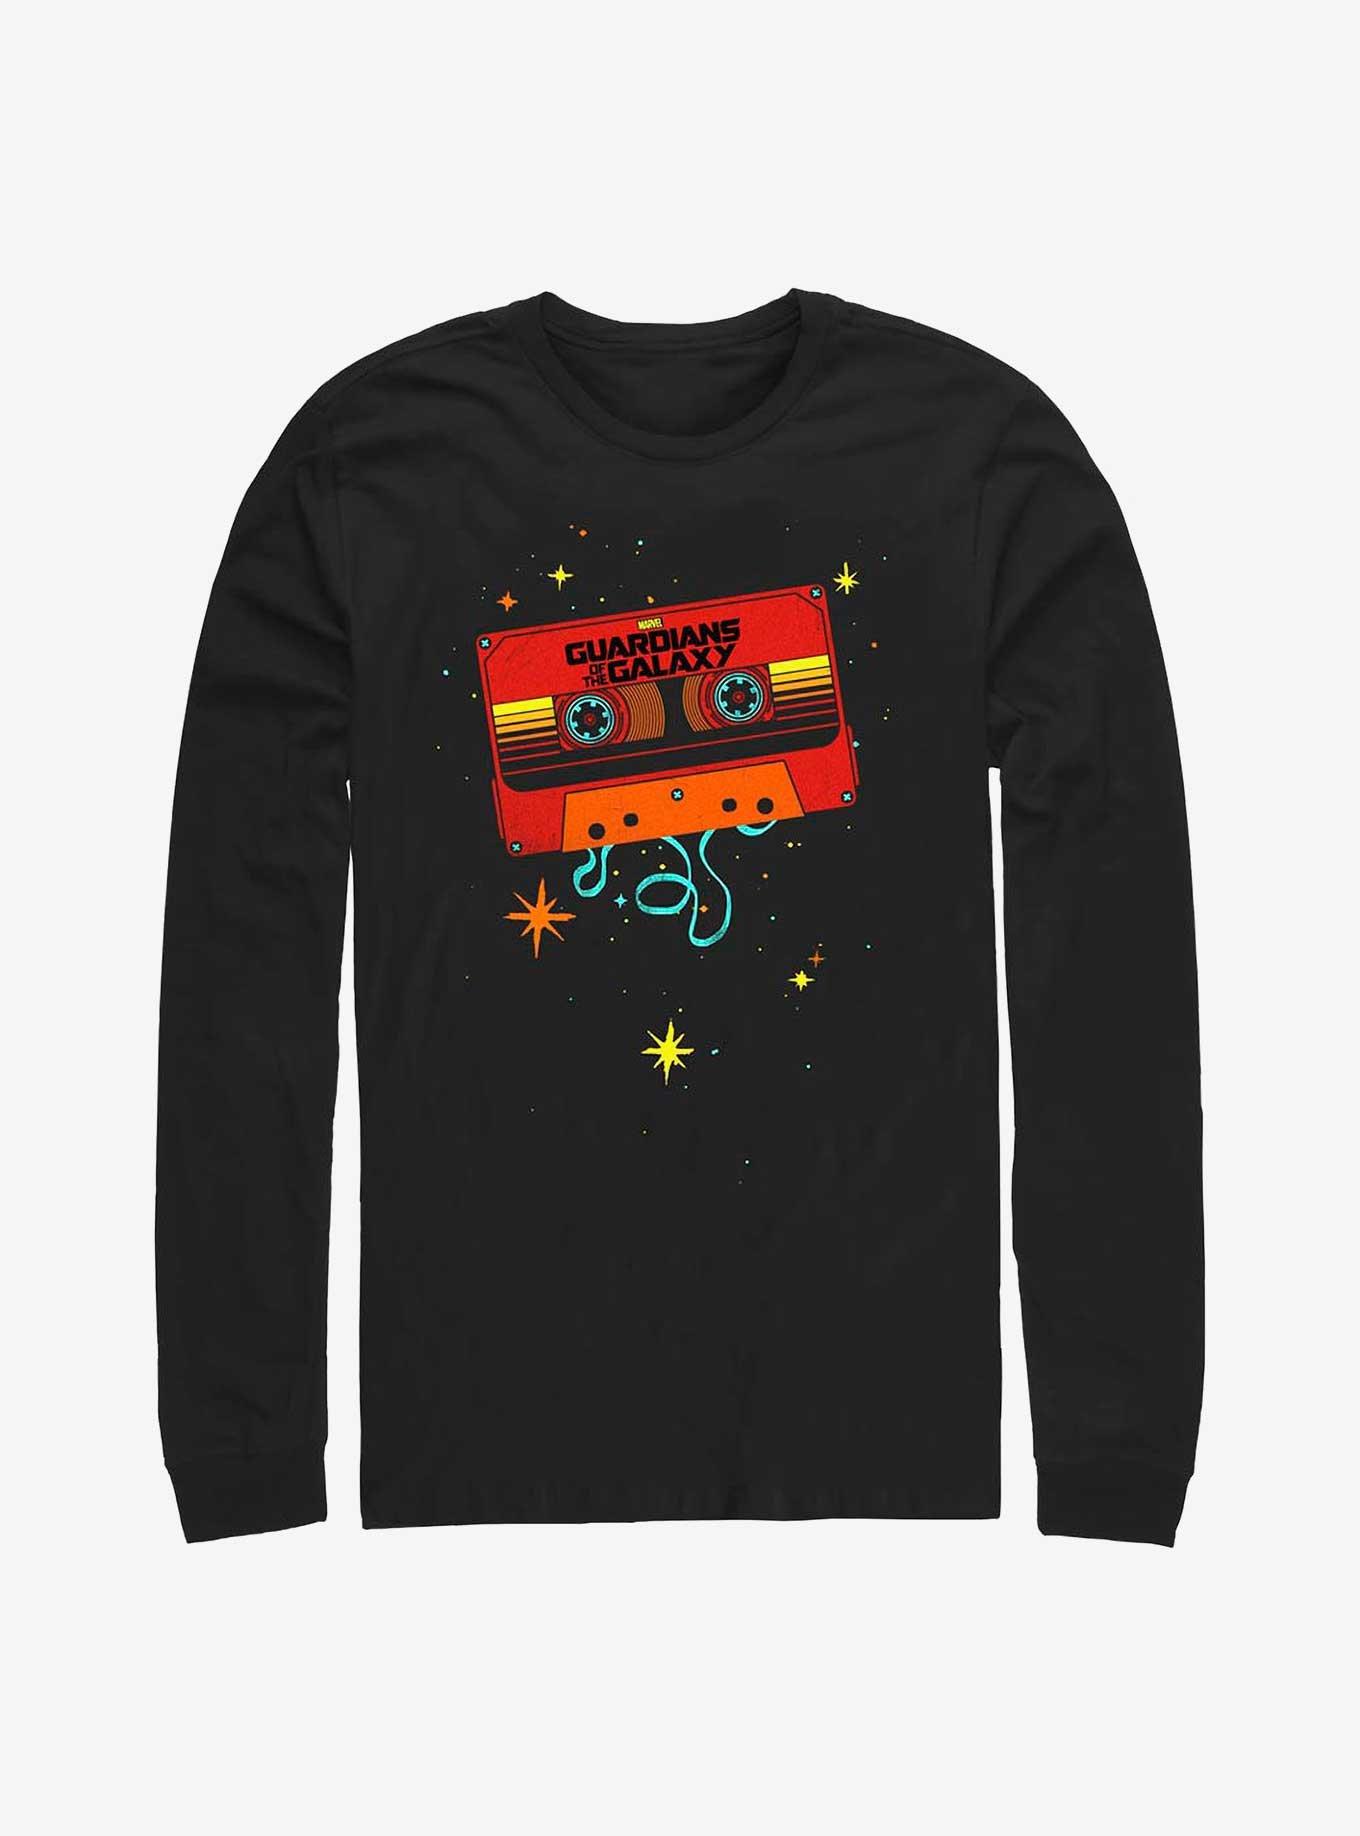 Marvel Guardians Of The Galaxy Cassette Tape Long Sleeve T-Shirt, , hi-res